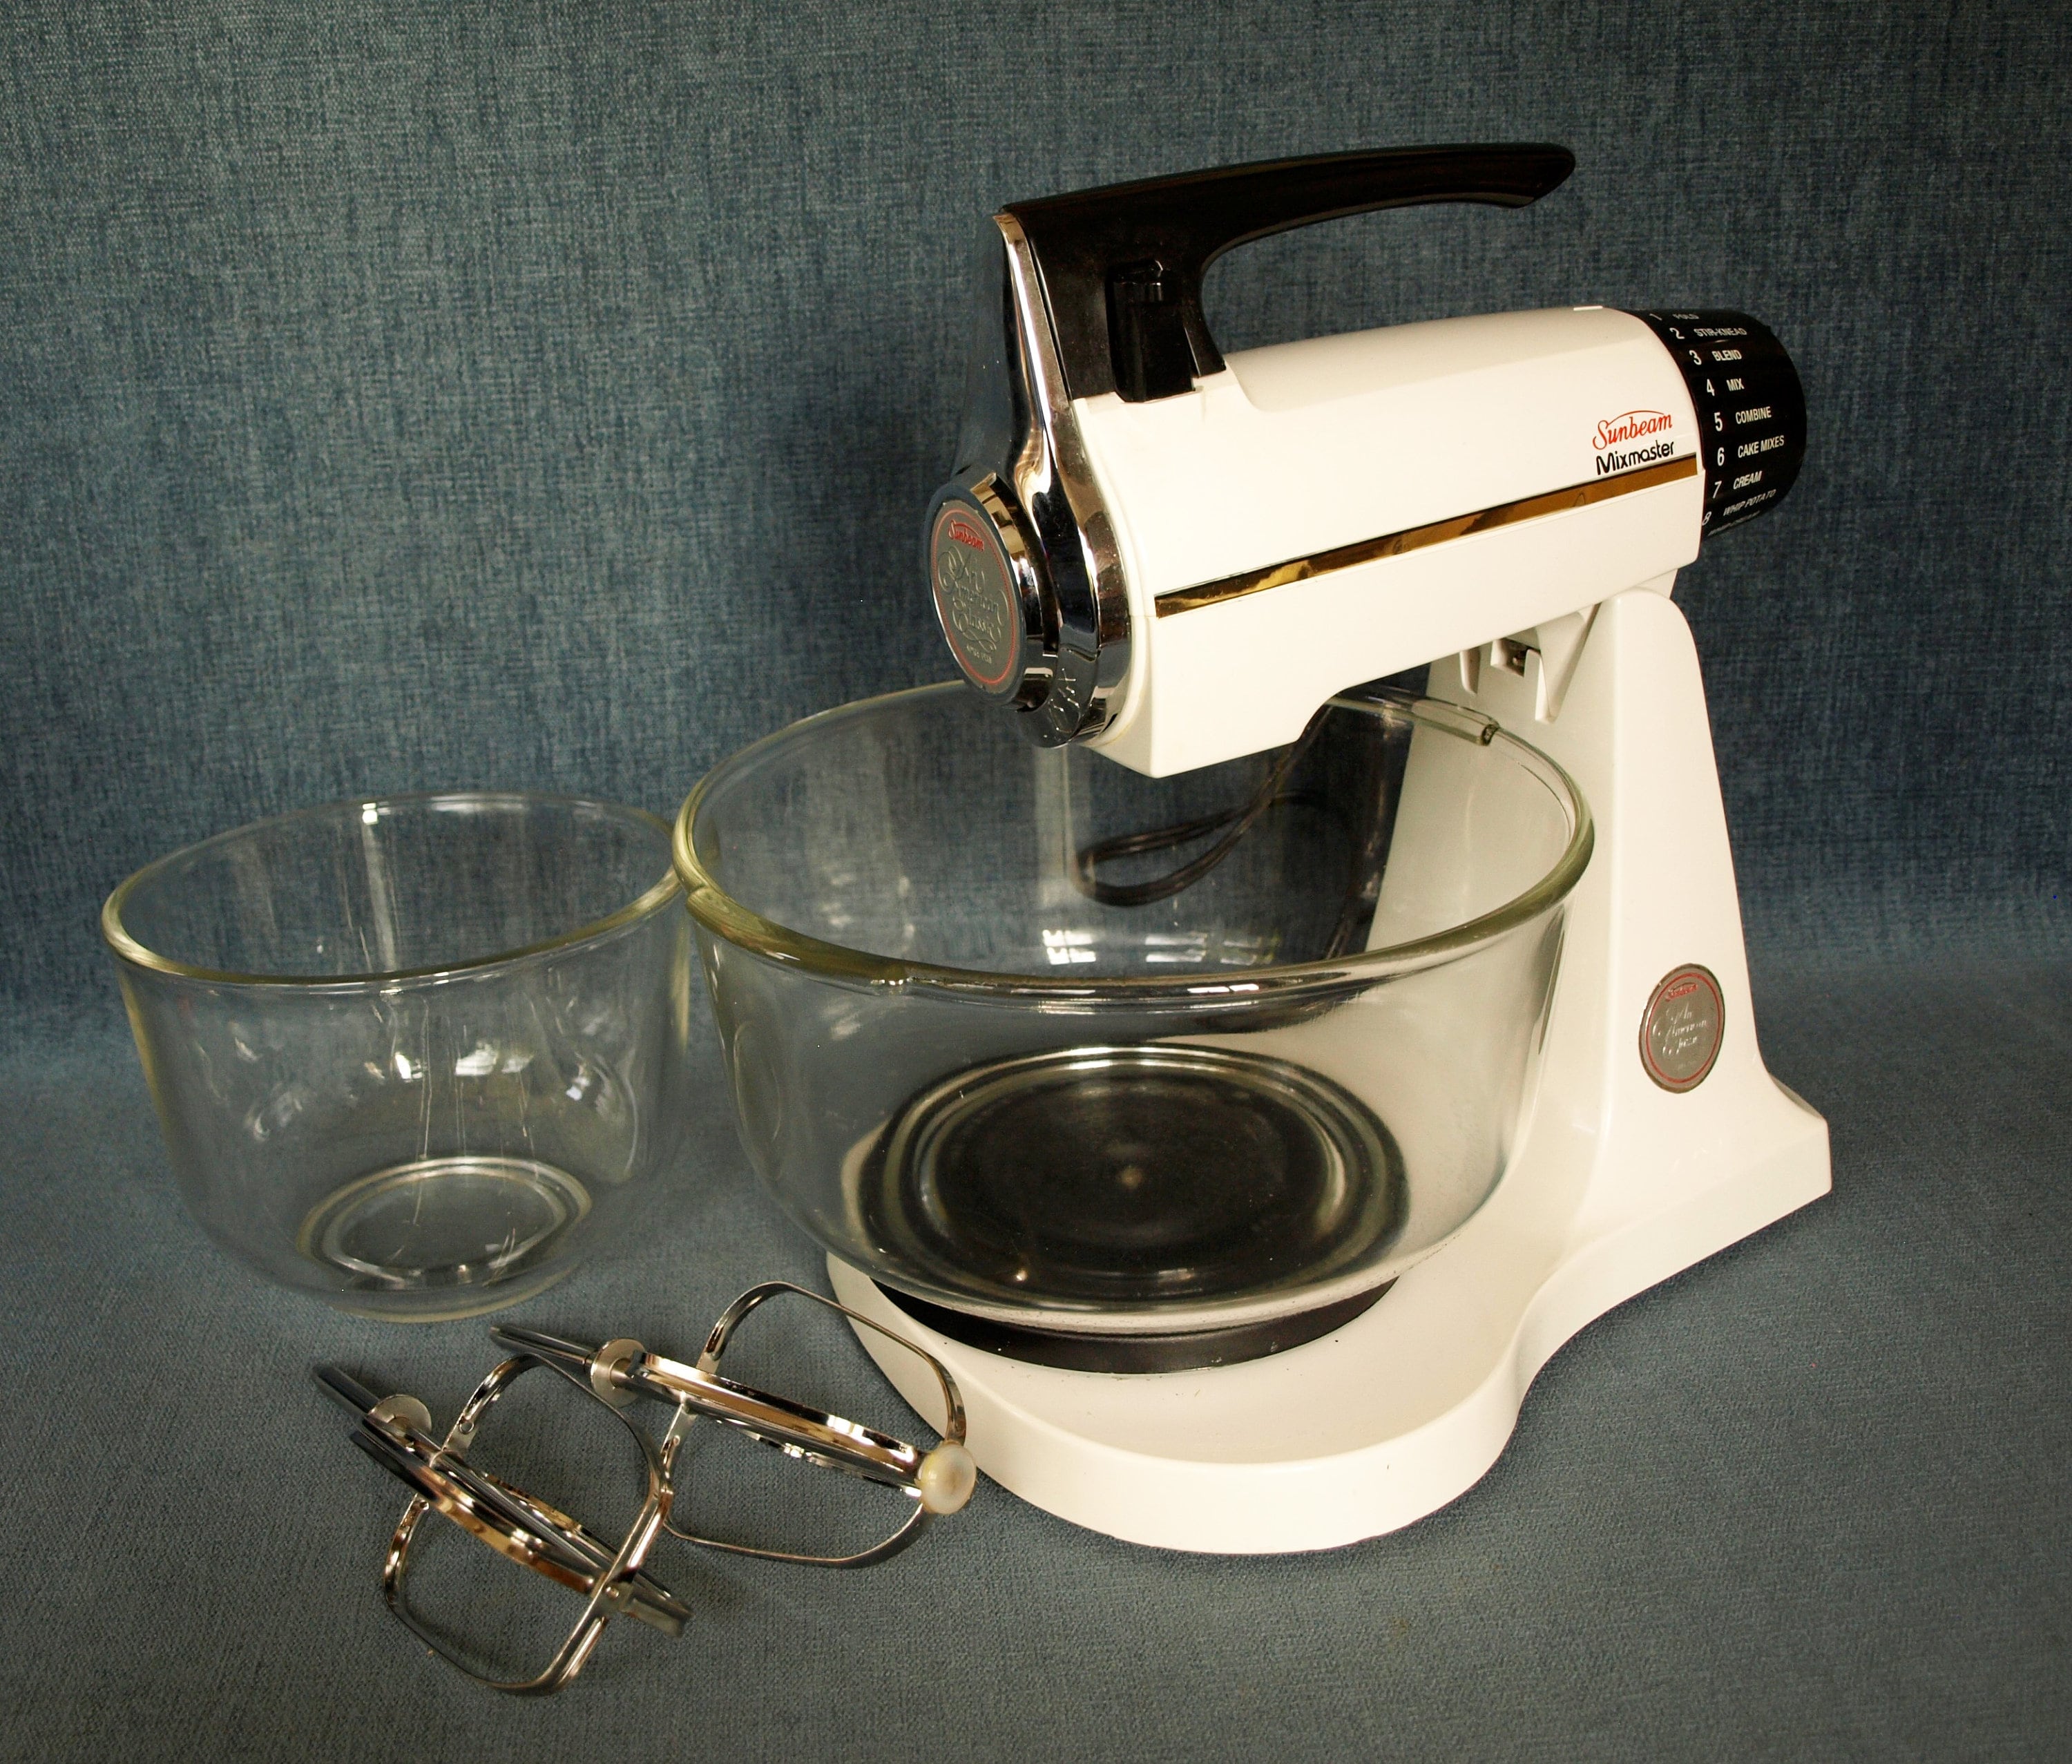 Sunbeam Mixmaster 12 Speed Stand Mixer Model 2360 W Two Clear Mixing Bowls  Superb Condition Works 1.9 Amps 120 Volts 60 Htz - Etsy India